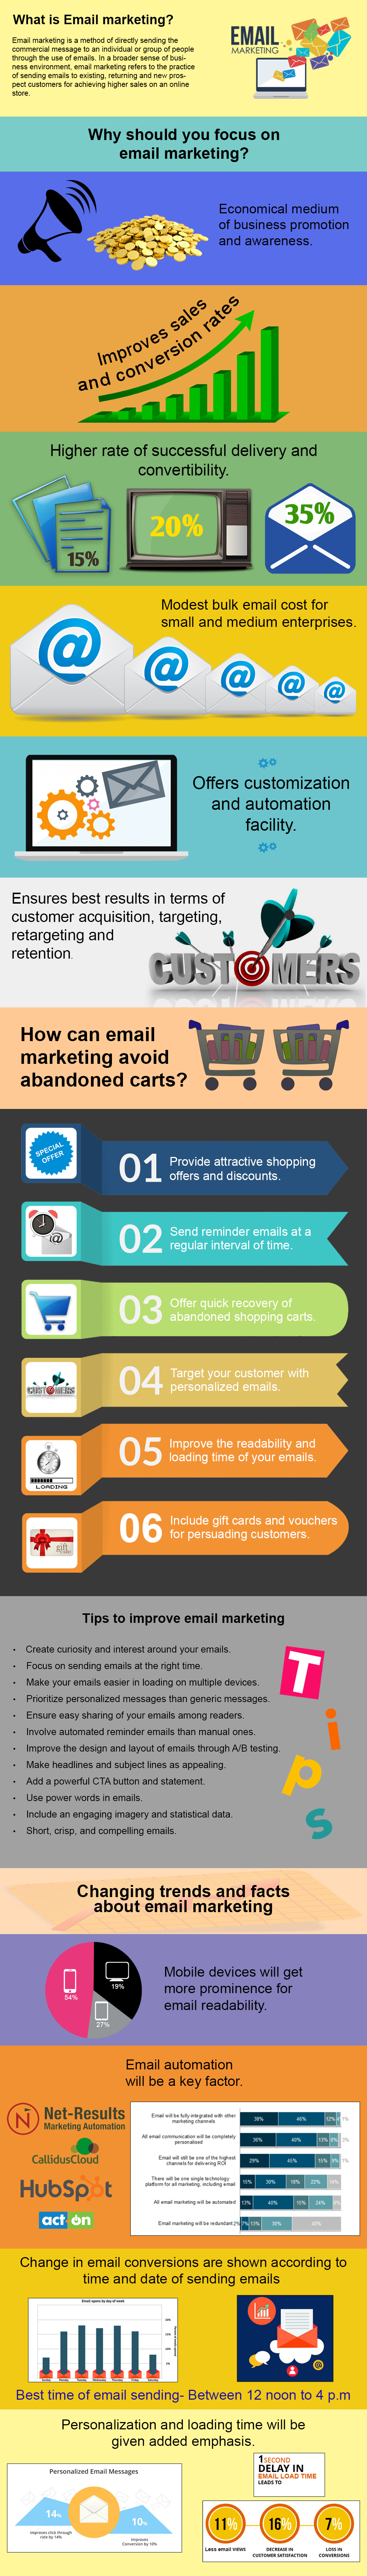 eCommerce Conversions through email marketing | knowband